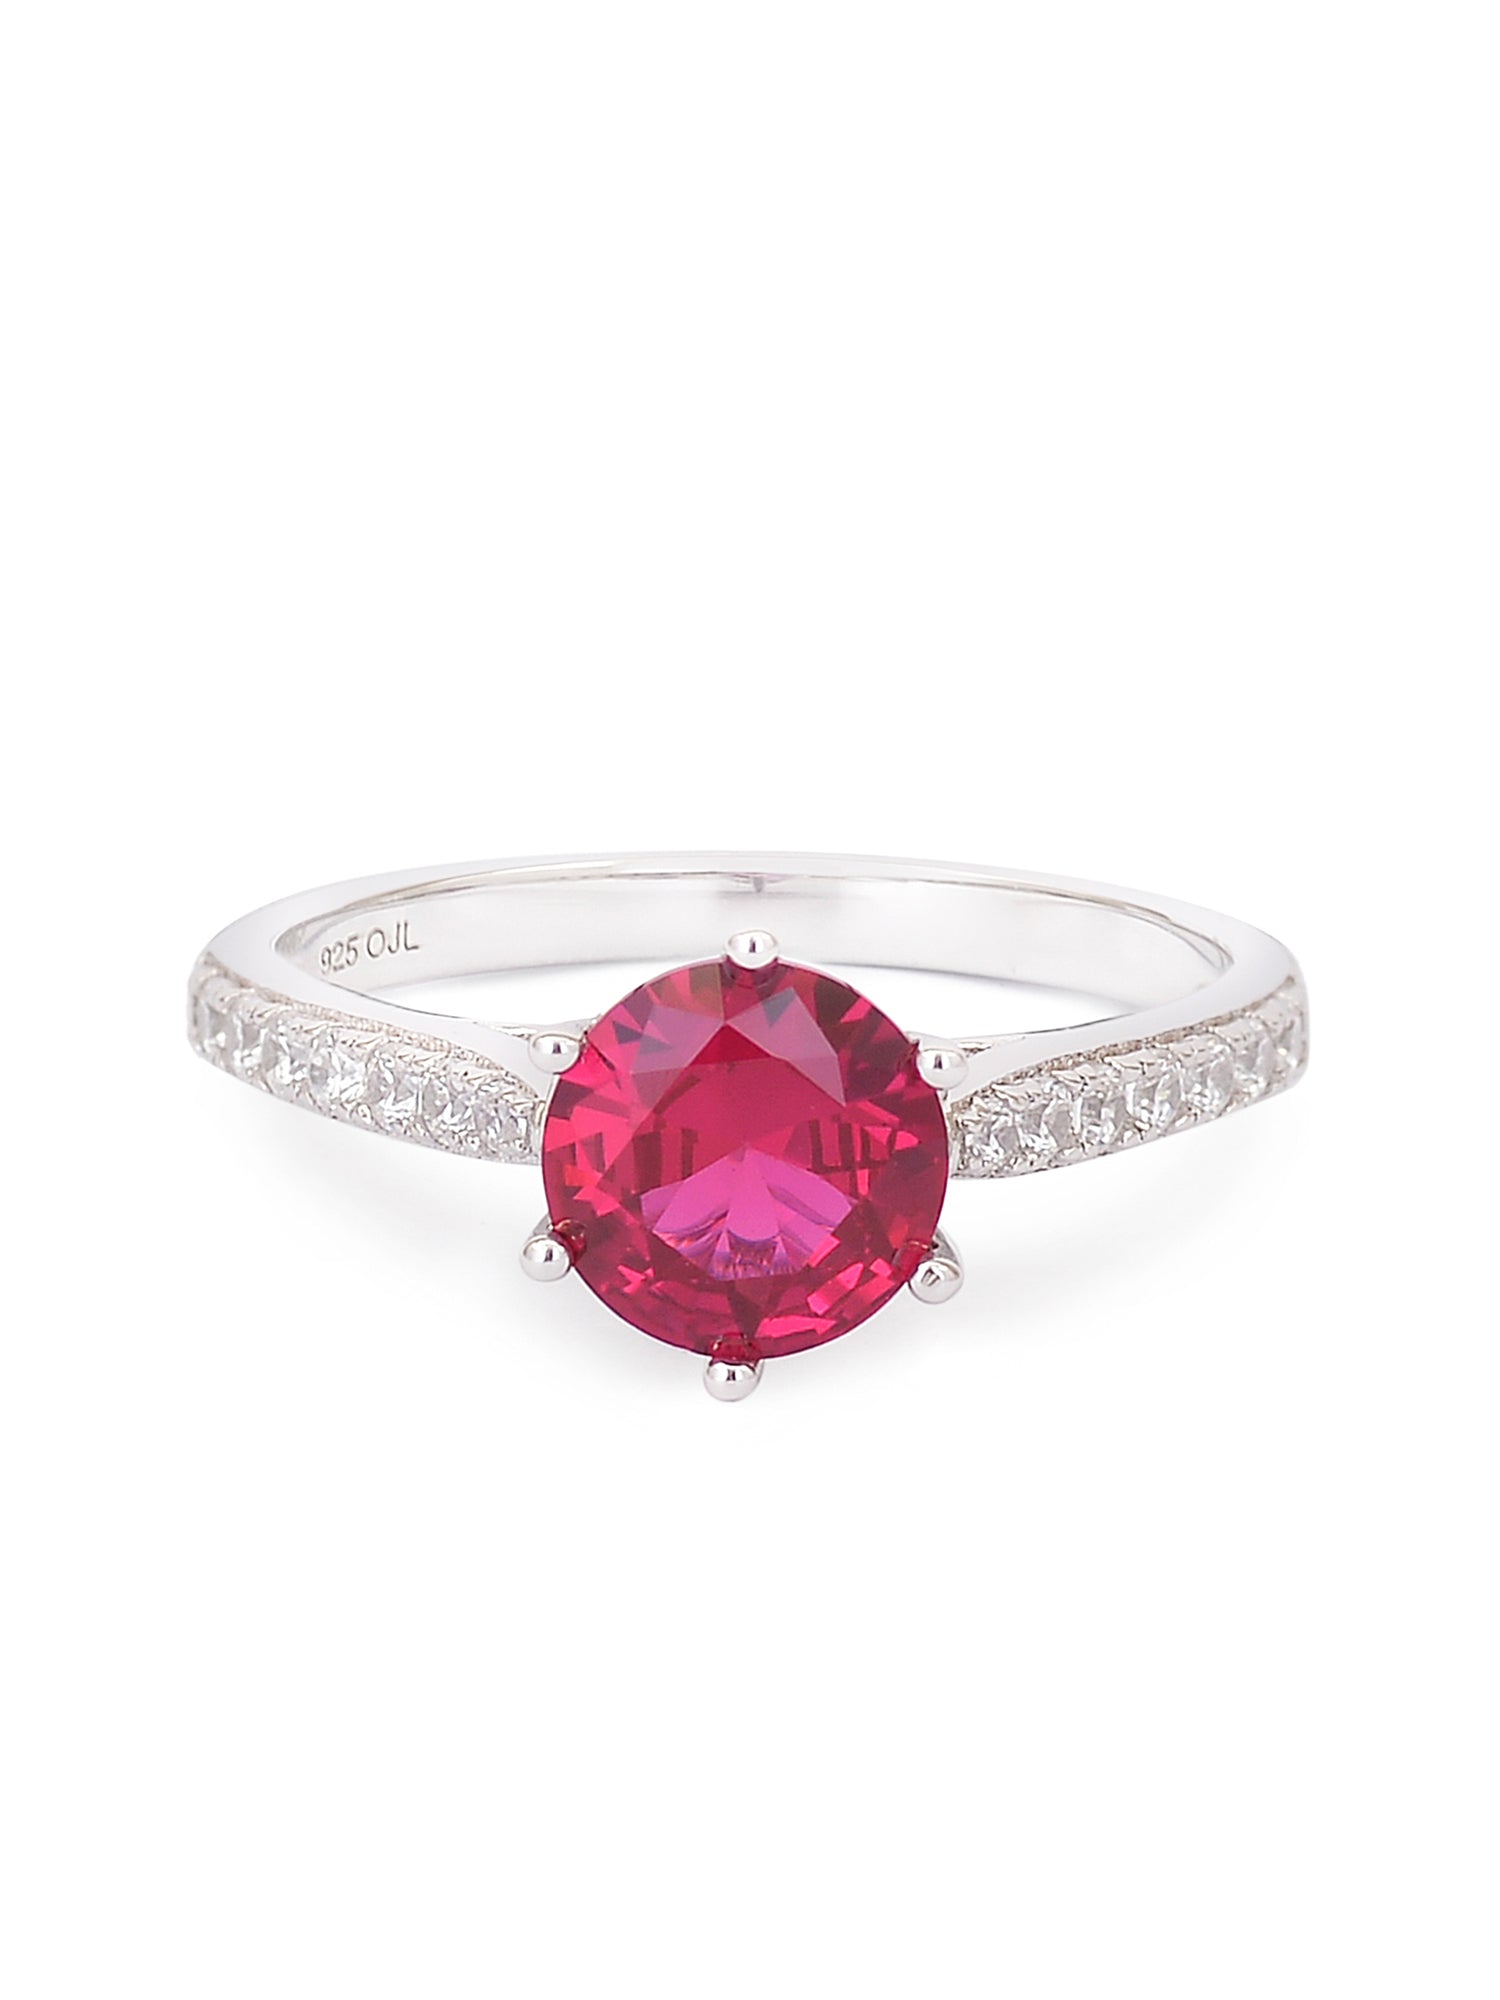 RED RUBY SOLITAIRE SILVER 925 RING FOR WOMEN